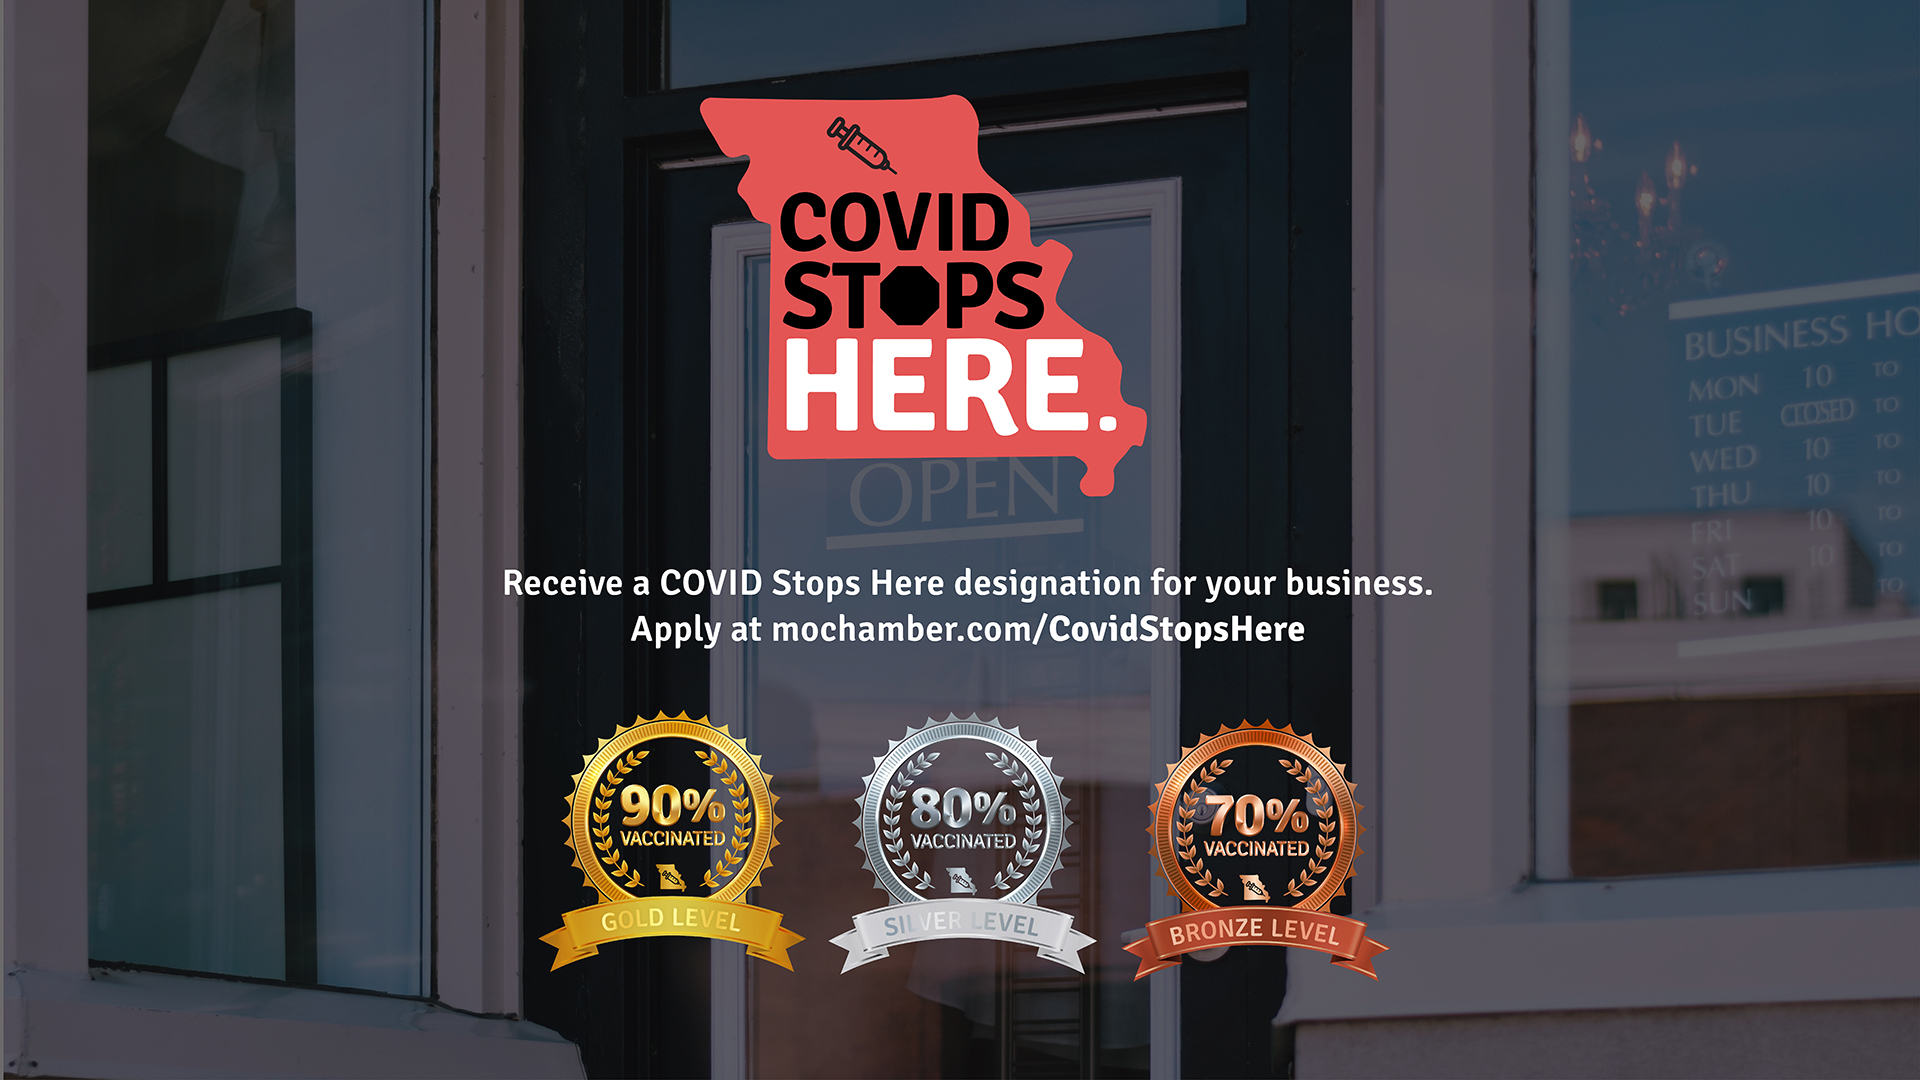 Covid Stops Here. Receive a COVID Stops Here designation for your business. Apply at https://mochamber.com/CovidStopsHere